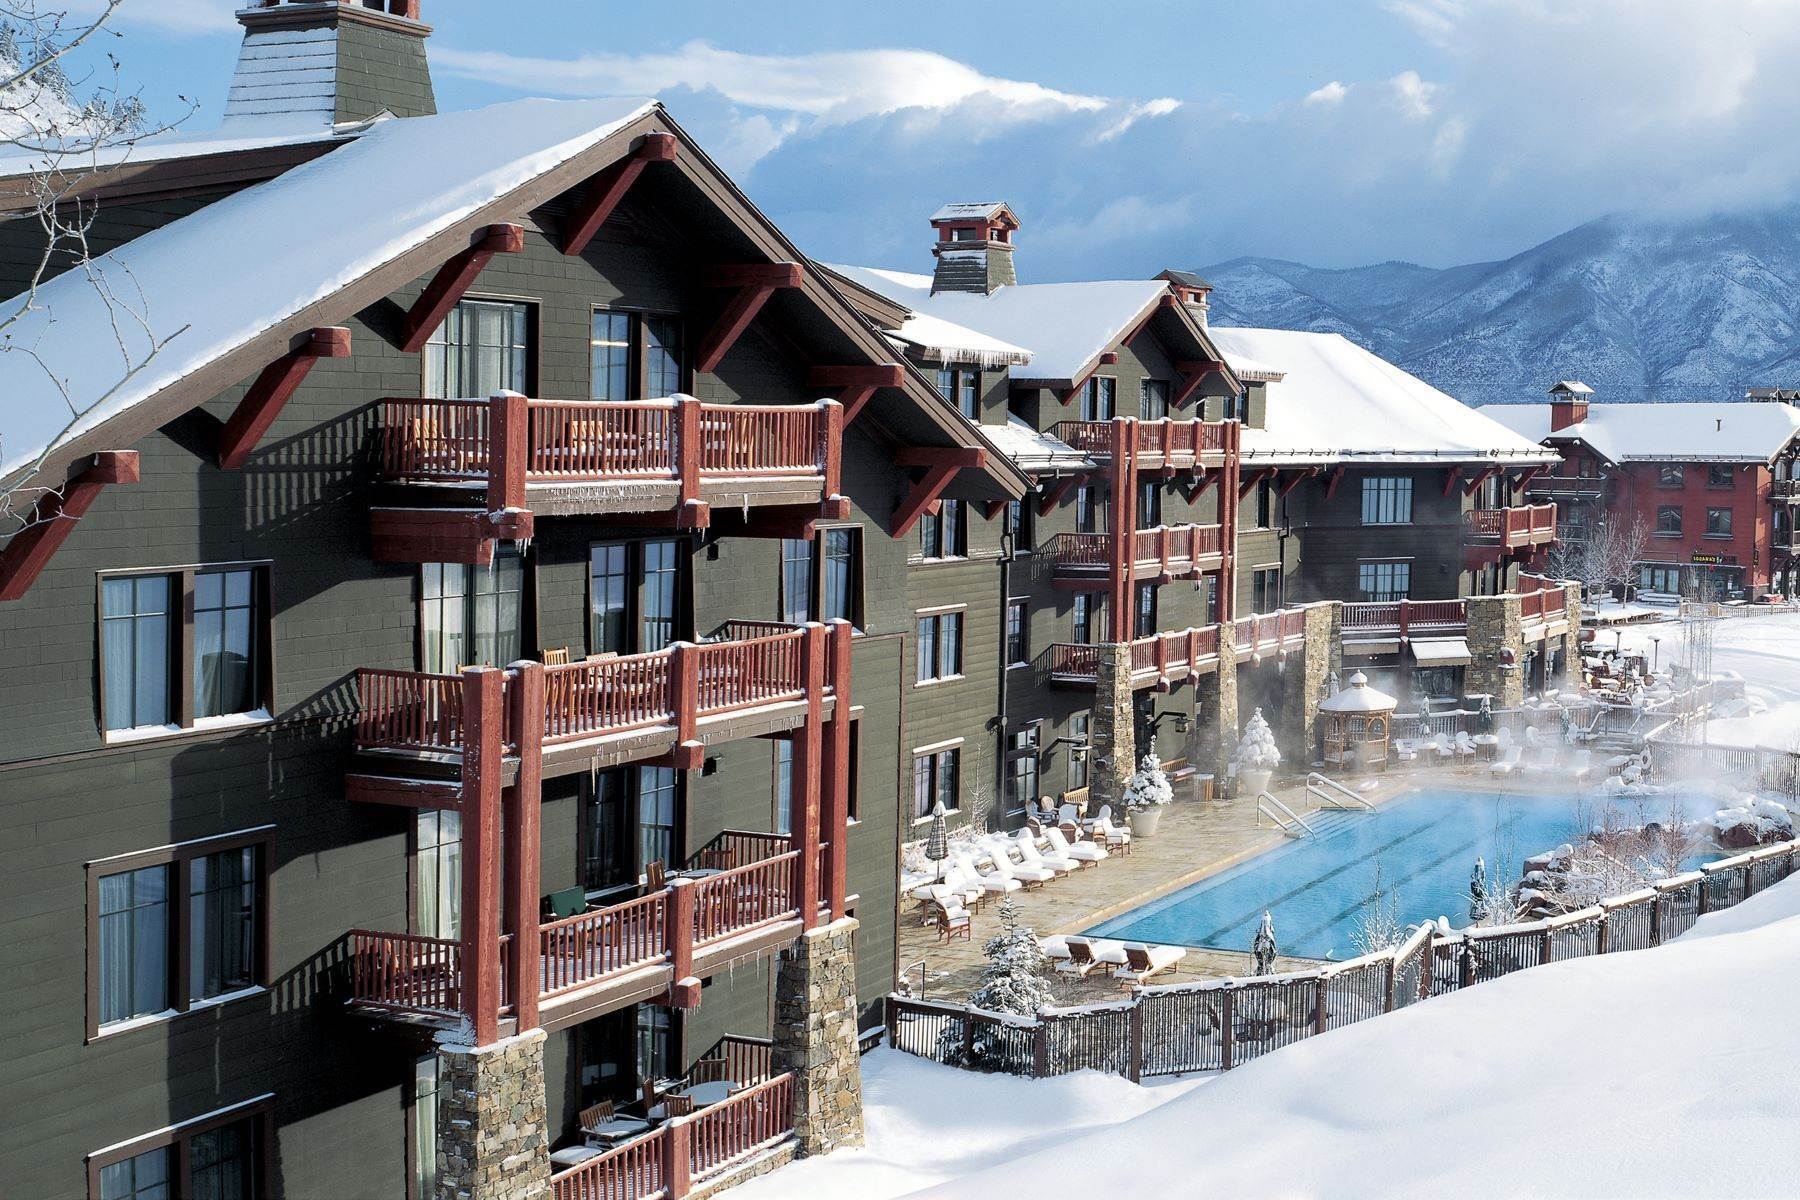 Fractional Ownership Property for Sale at 3 Bedroom Ritz Carlton Club - Winter Interest #3 0039 Boomerang Road, Unit 8211 Winter Interest 3 Aspen, Colorado 81611 United States